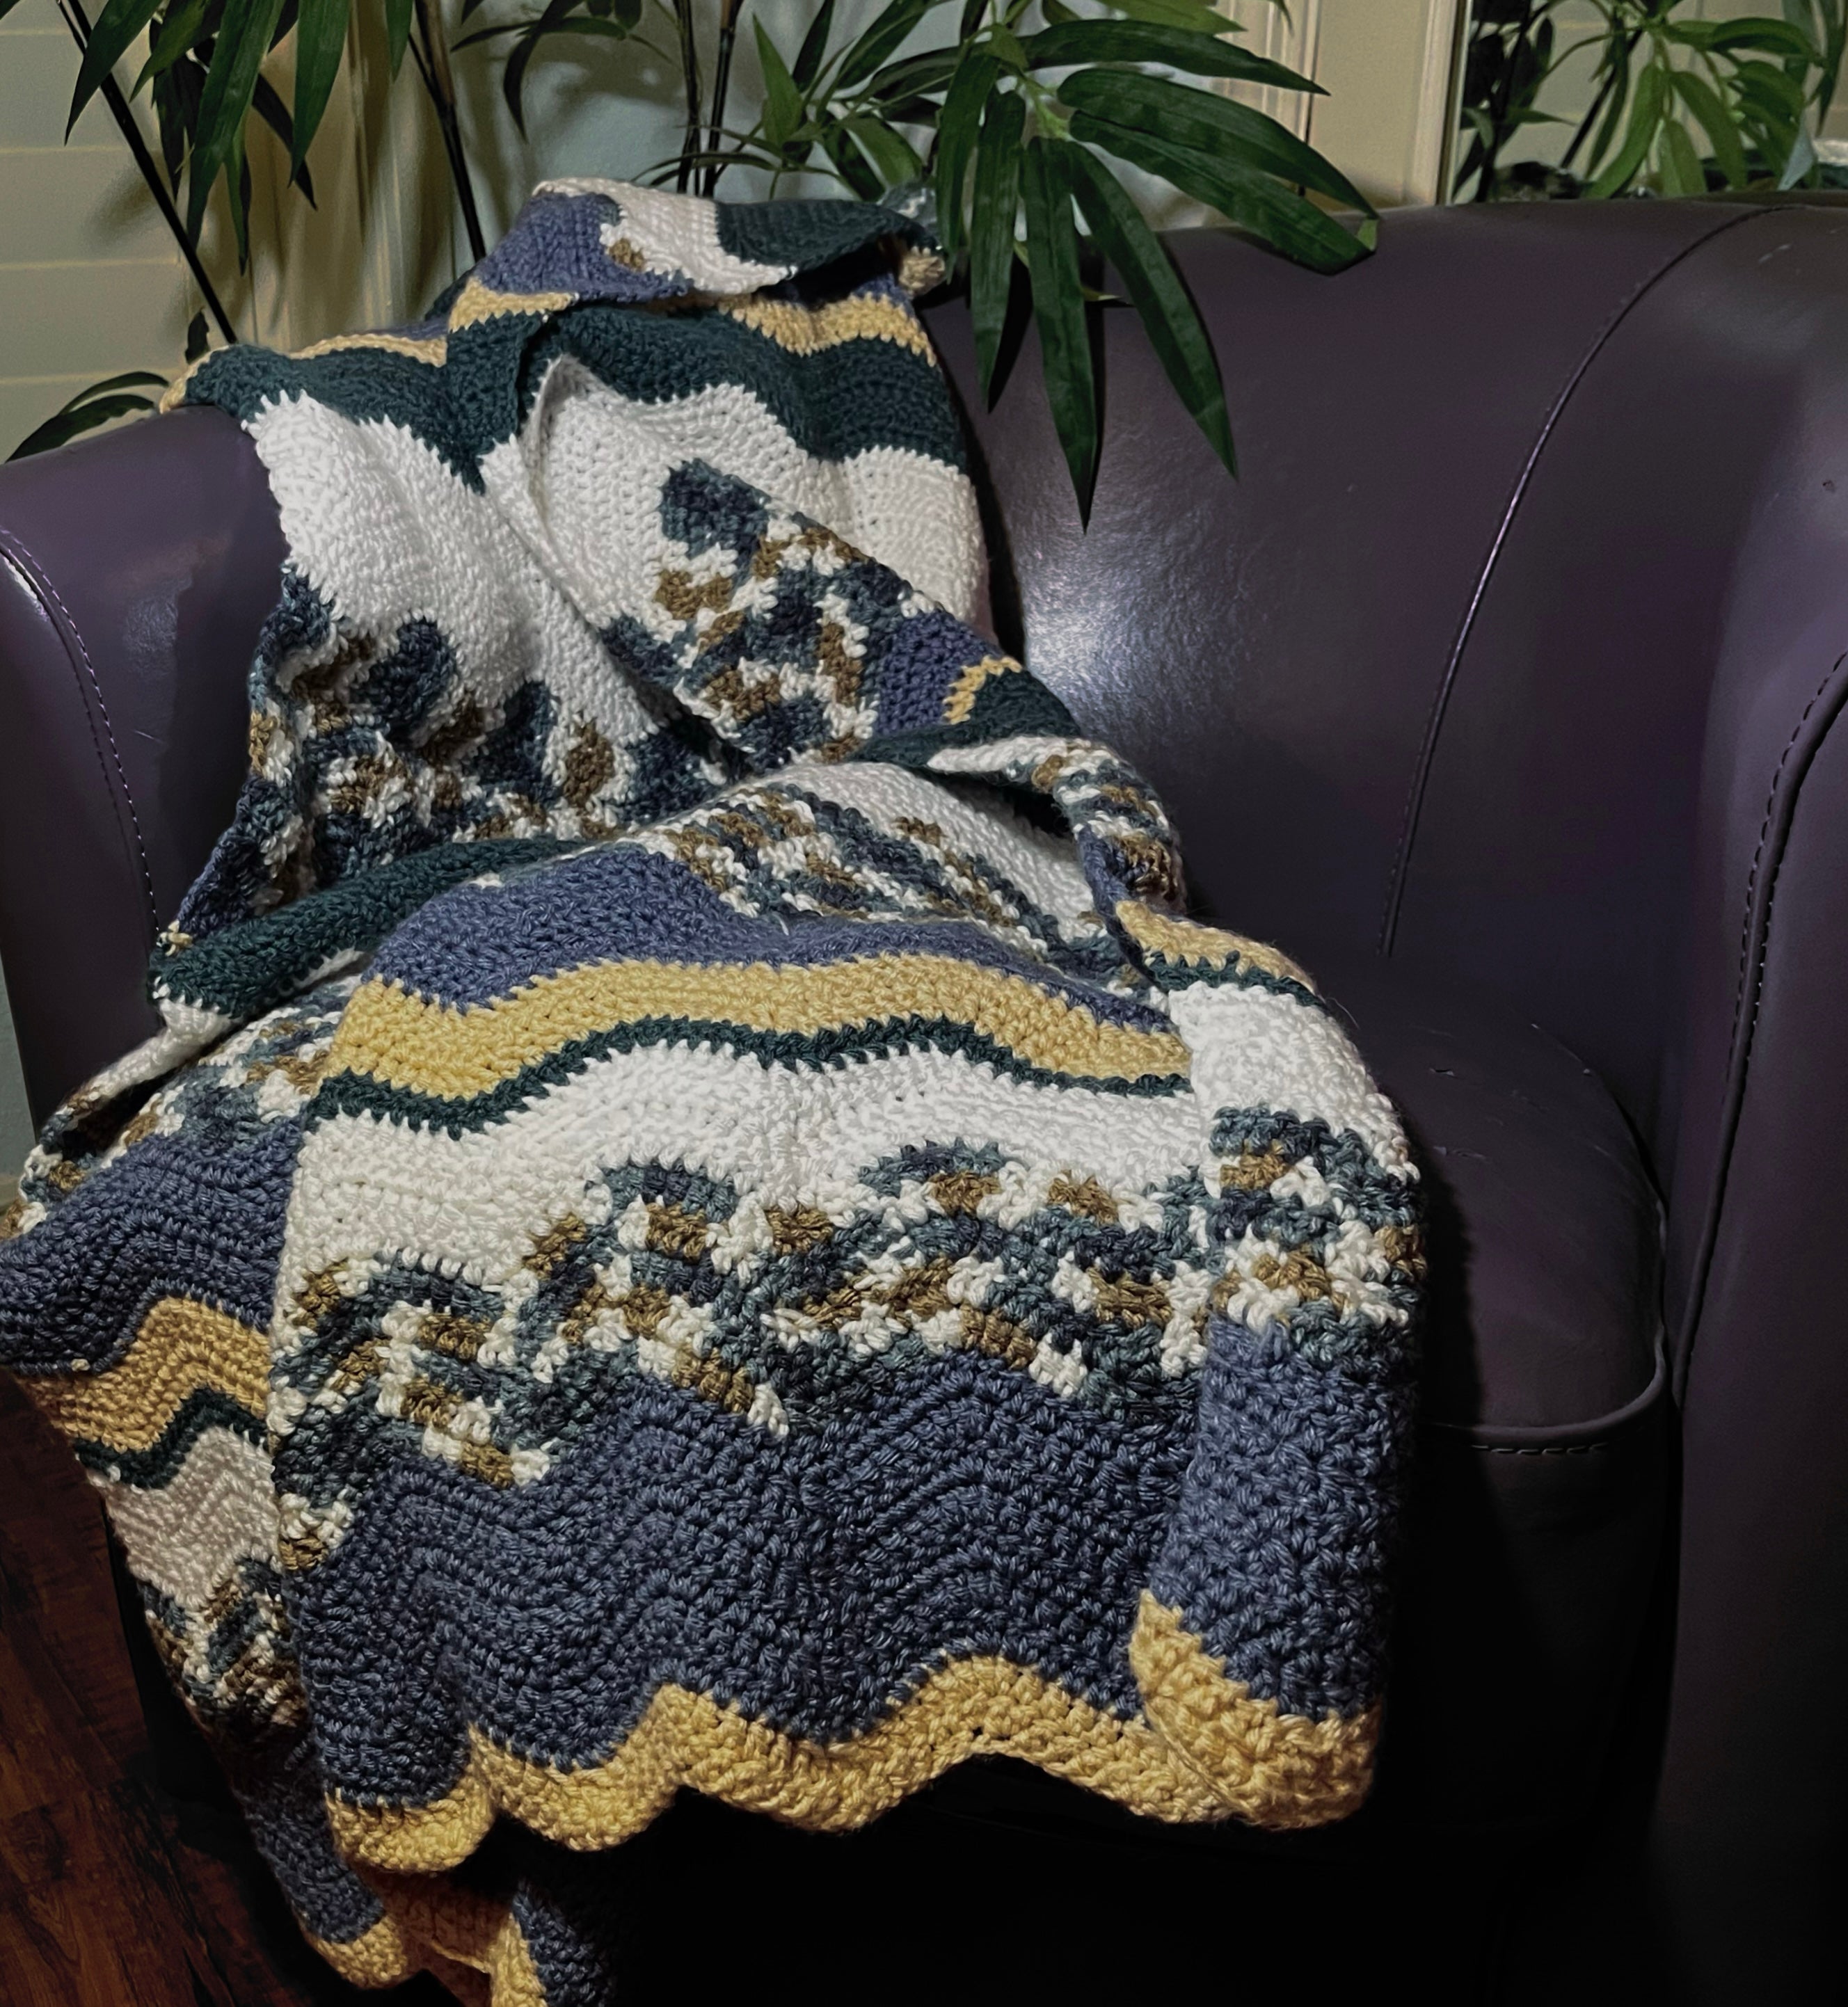 Crochet blanket with wavy stripes of light blue, white, beige, turquoise, and brown draped over a purple leather chair.